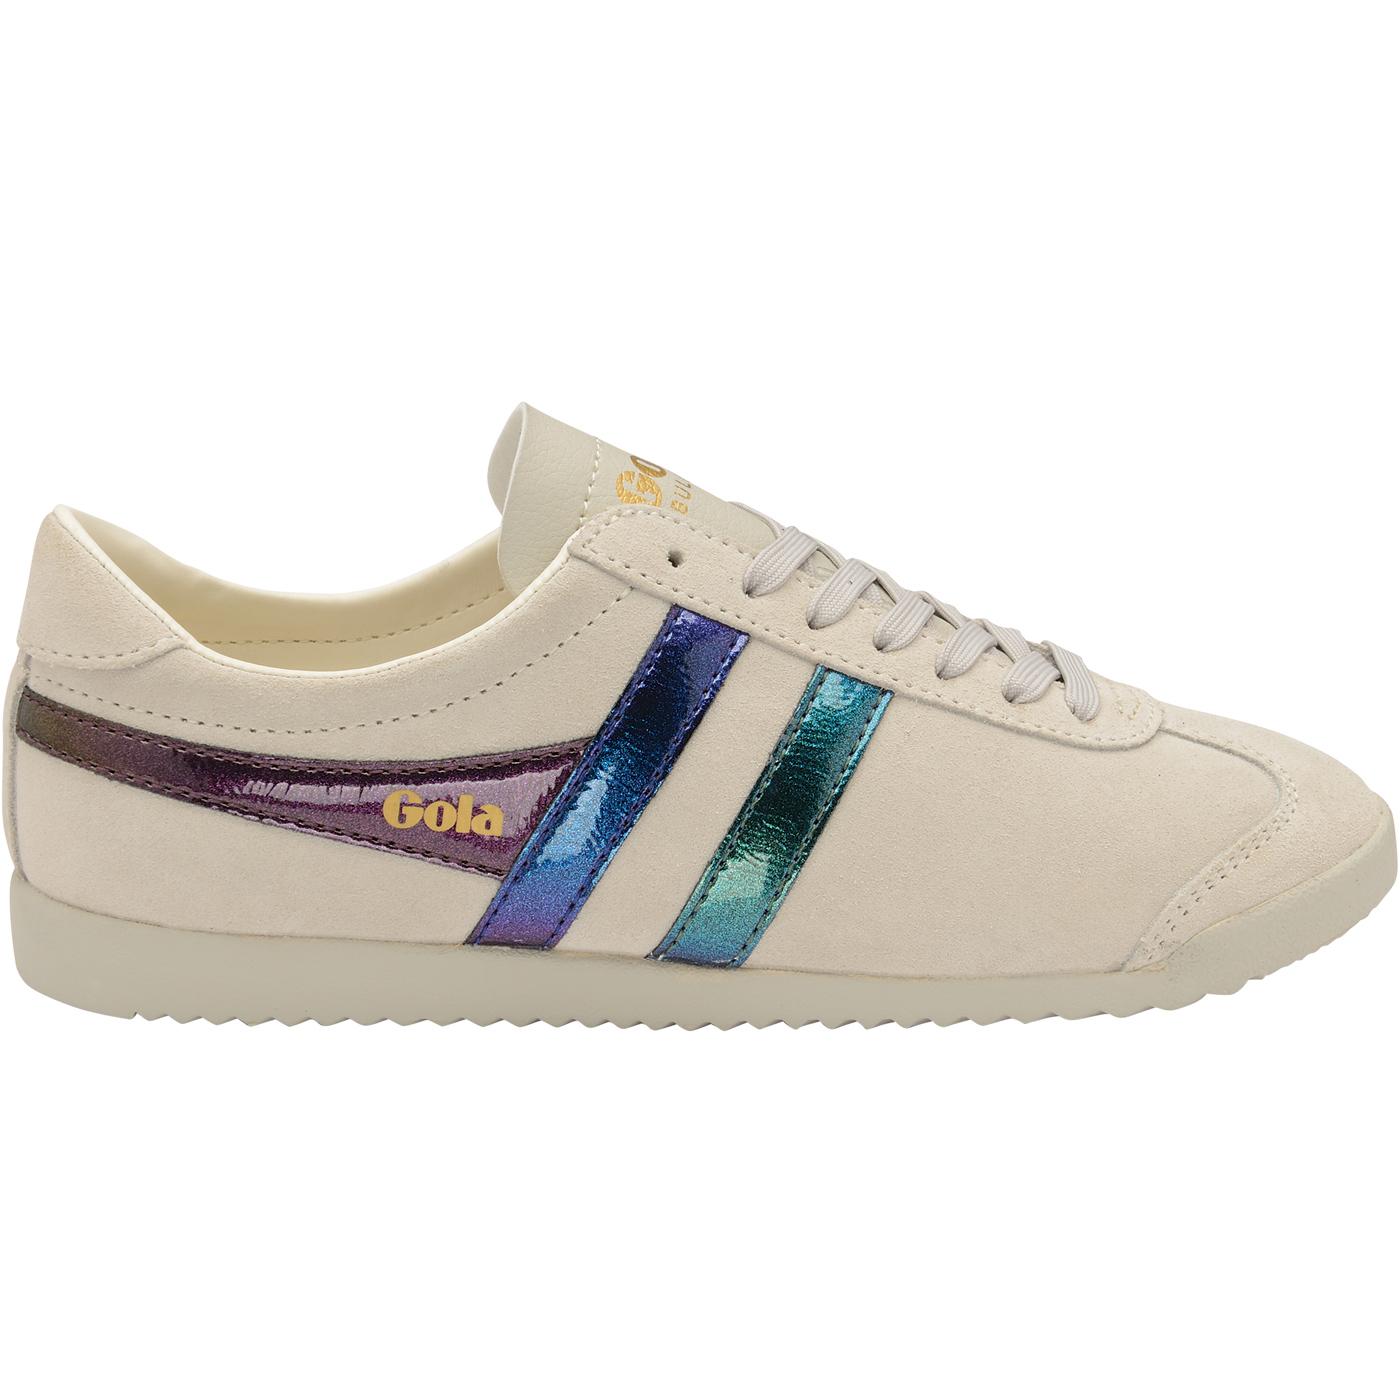 GOLA Bullet Flash Women's Retro Suede Trainers in Off White